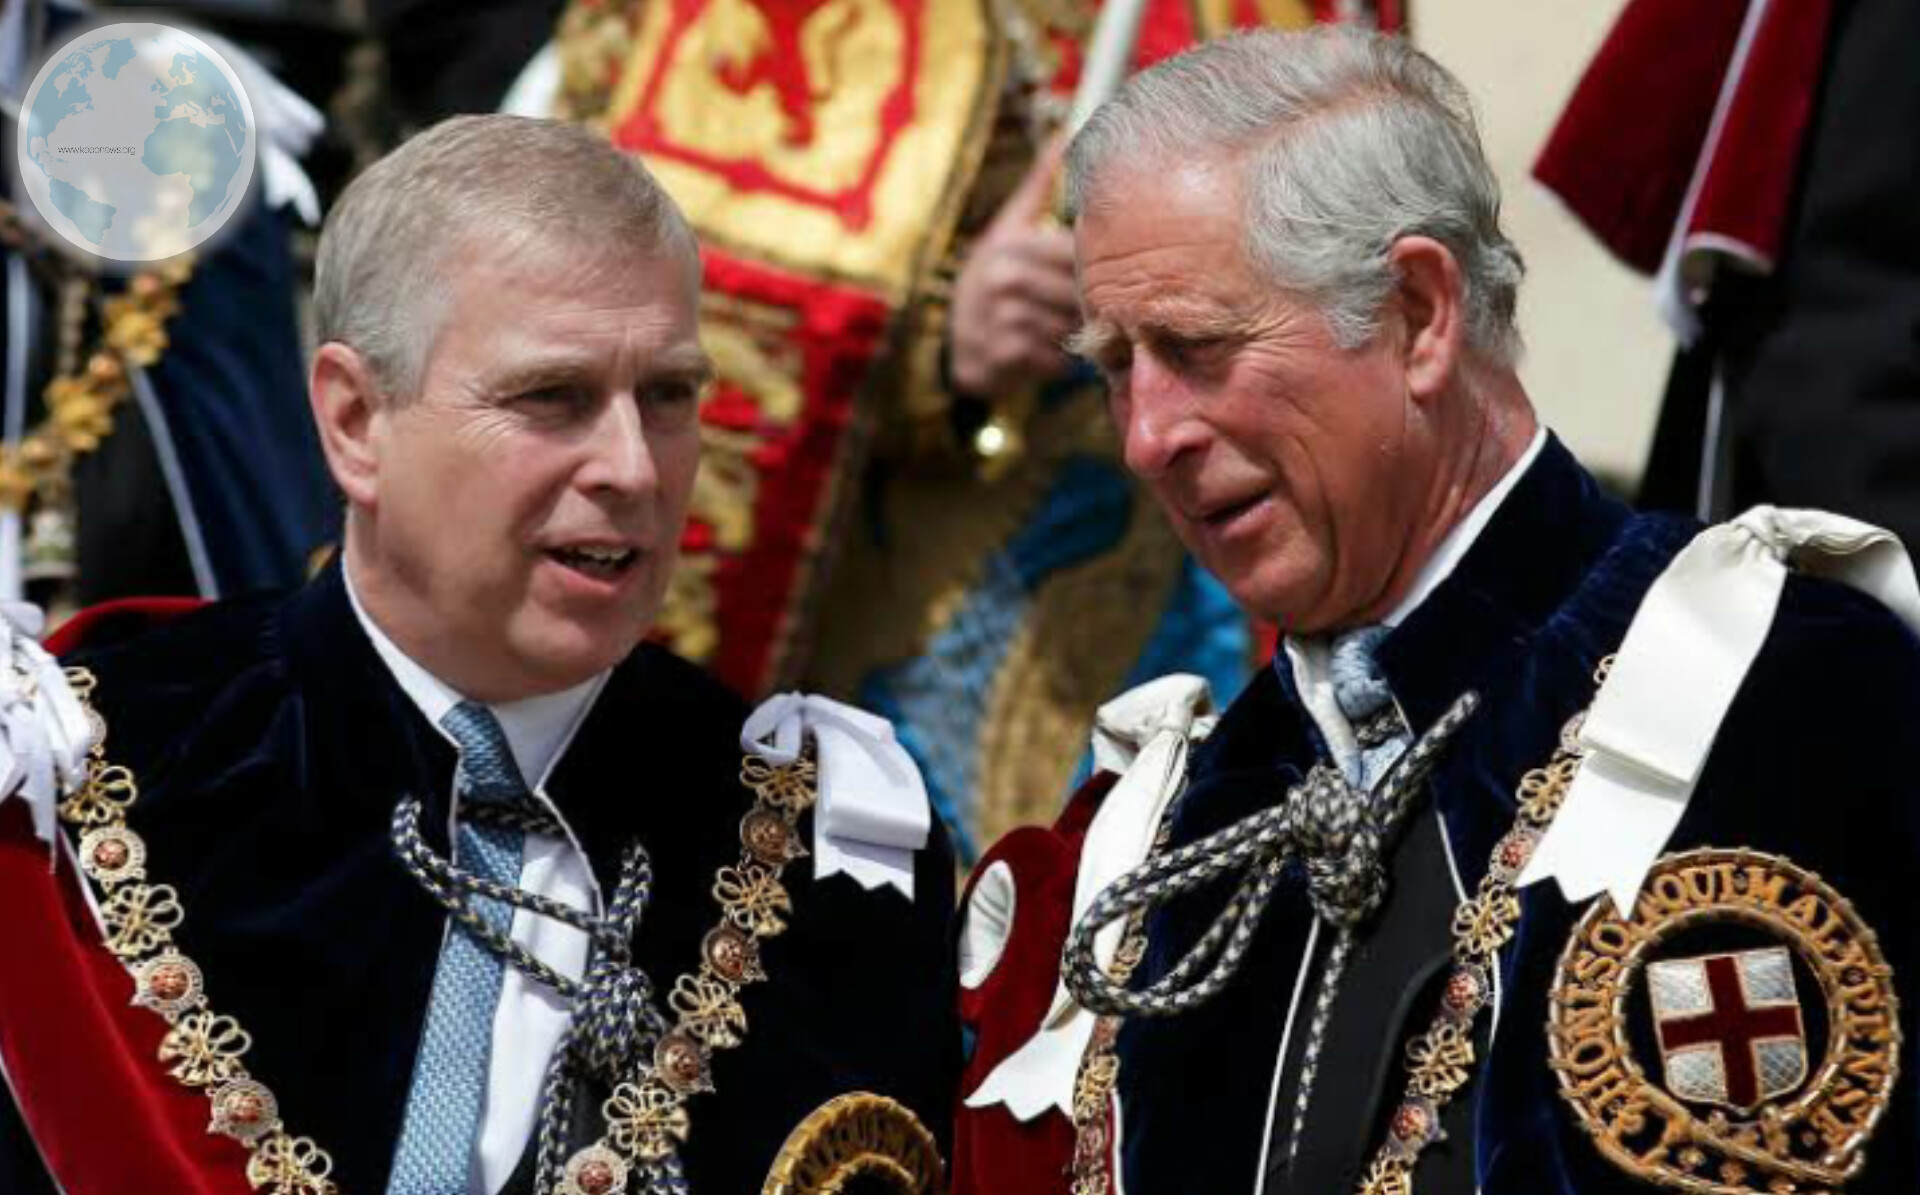 The King of Britain has decided to move Prince Andrew out of Buckingham Palace